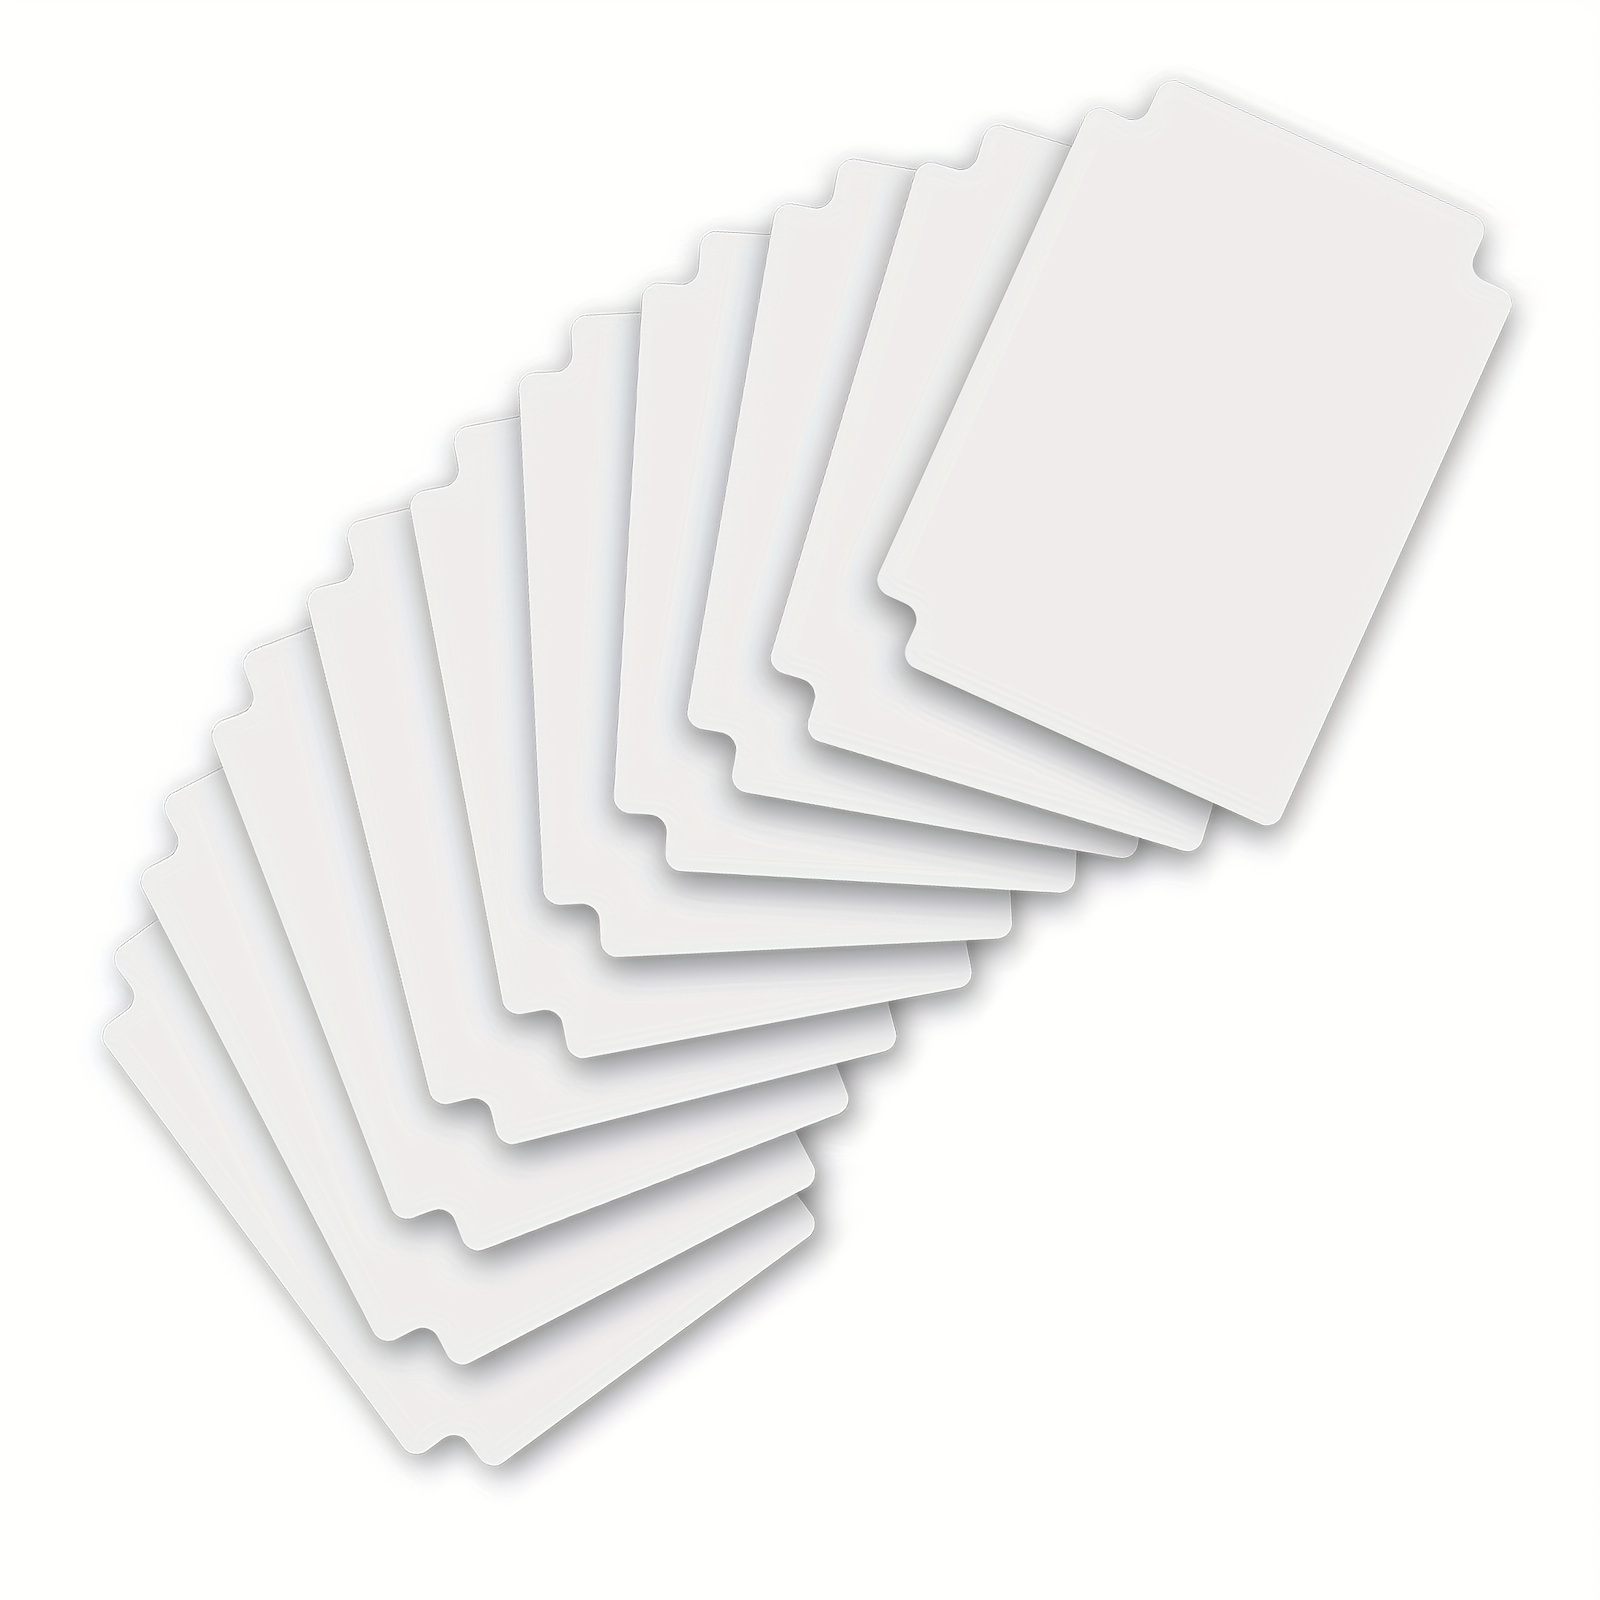 2 BCW Plastic Card Sorting Tray